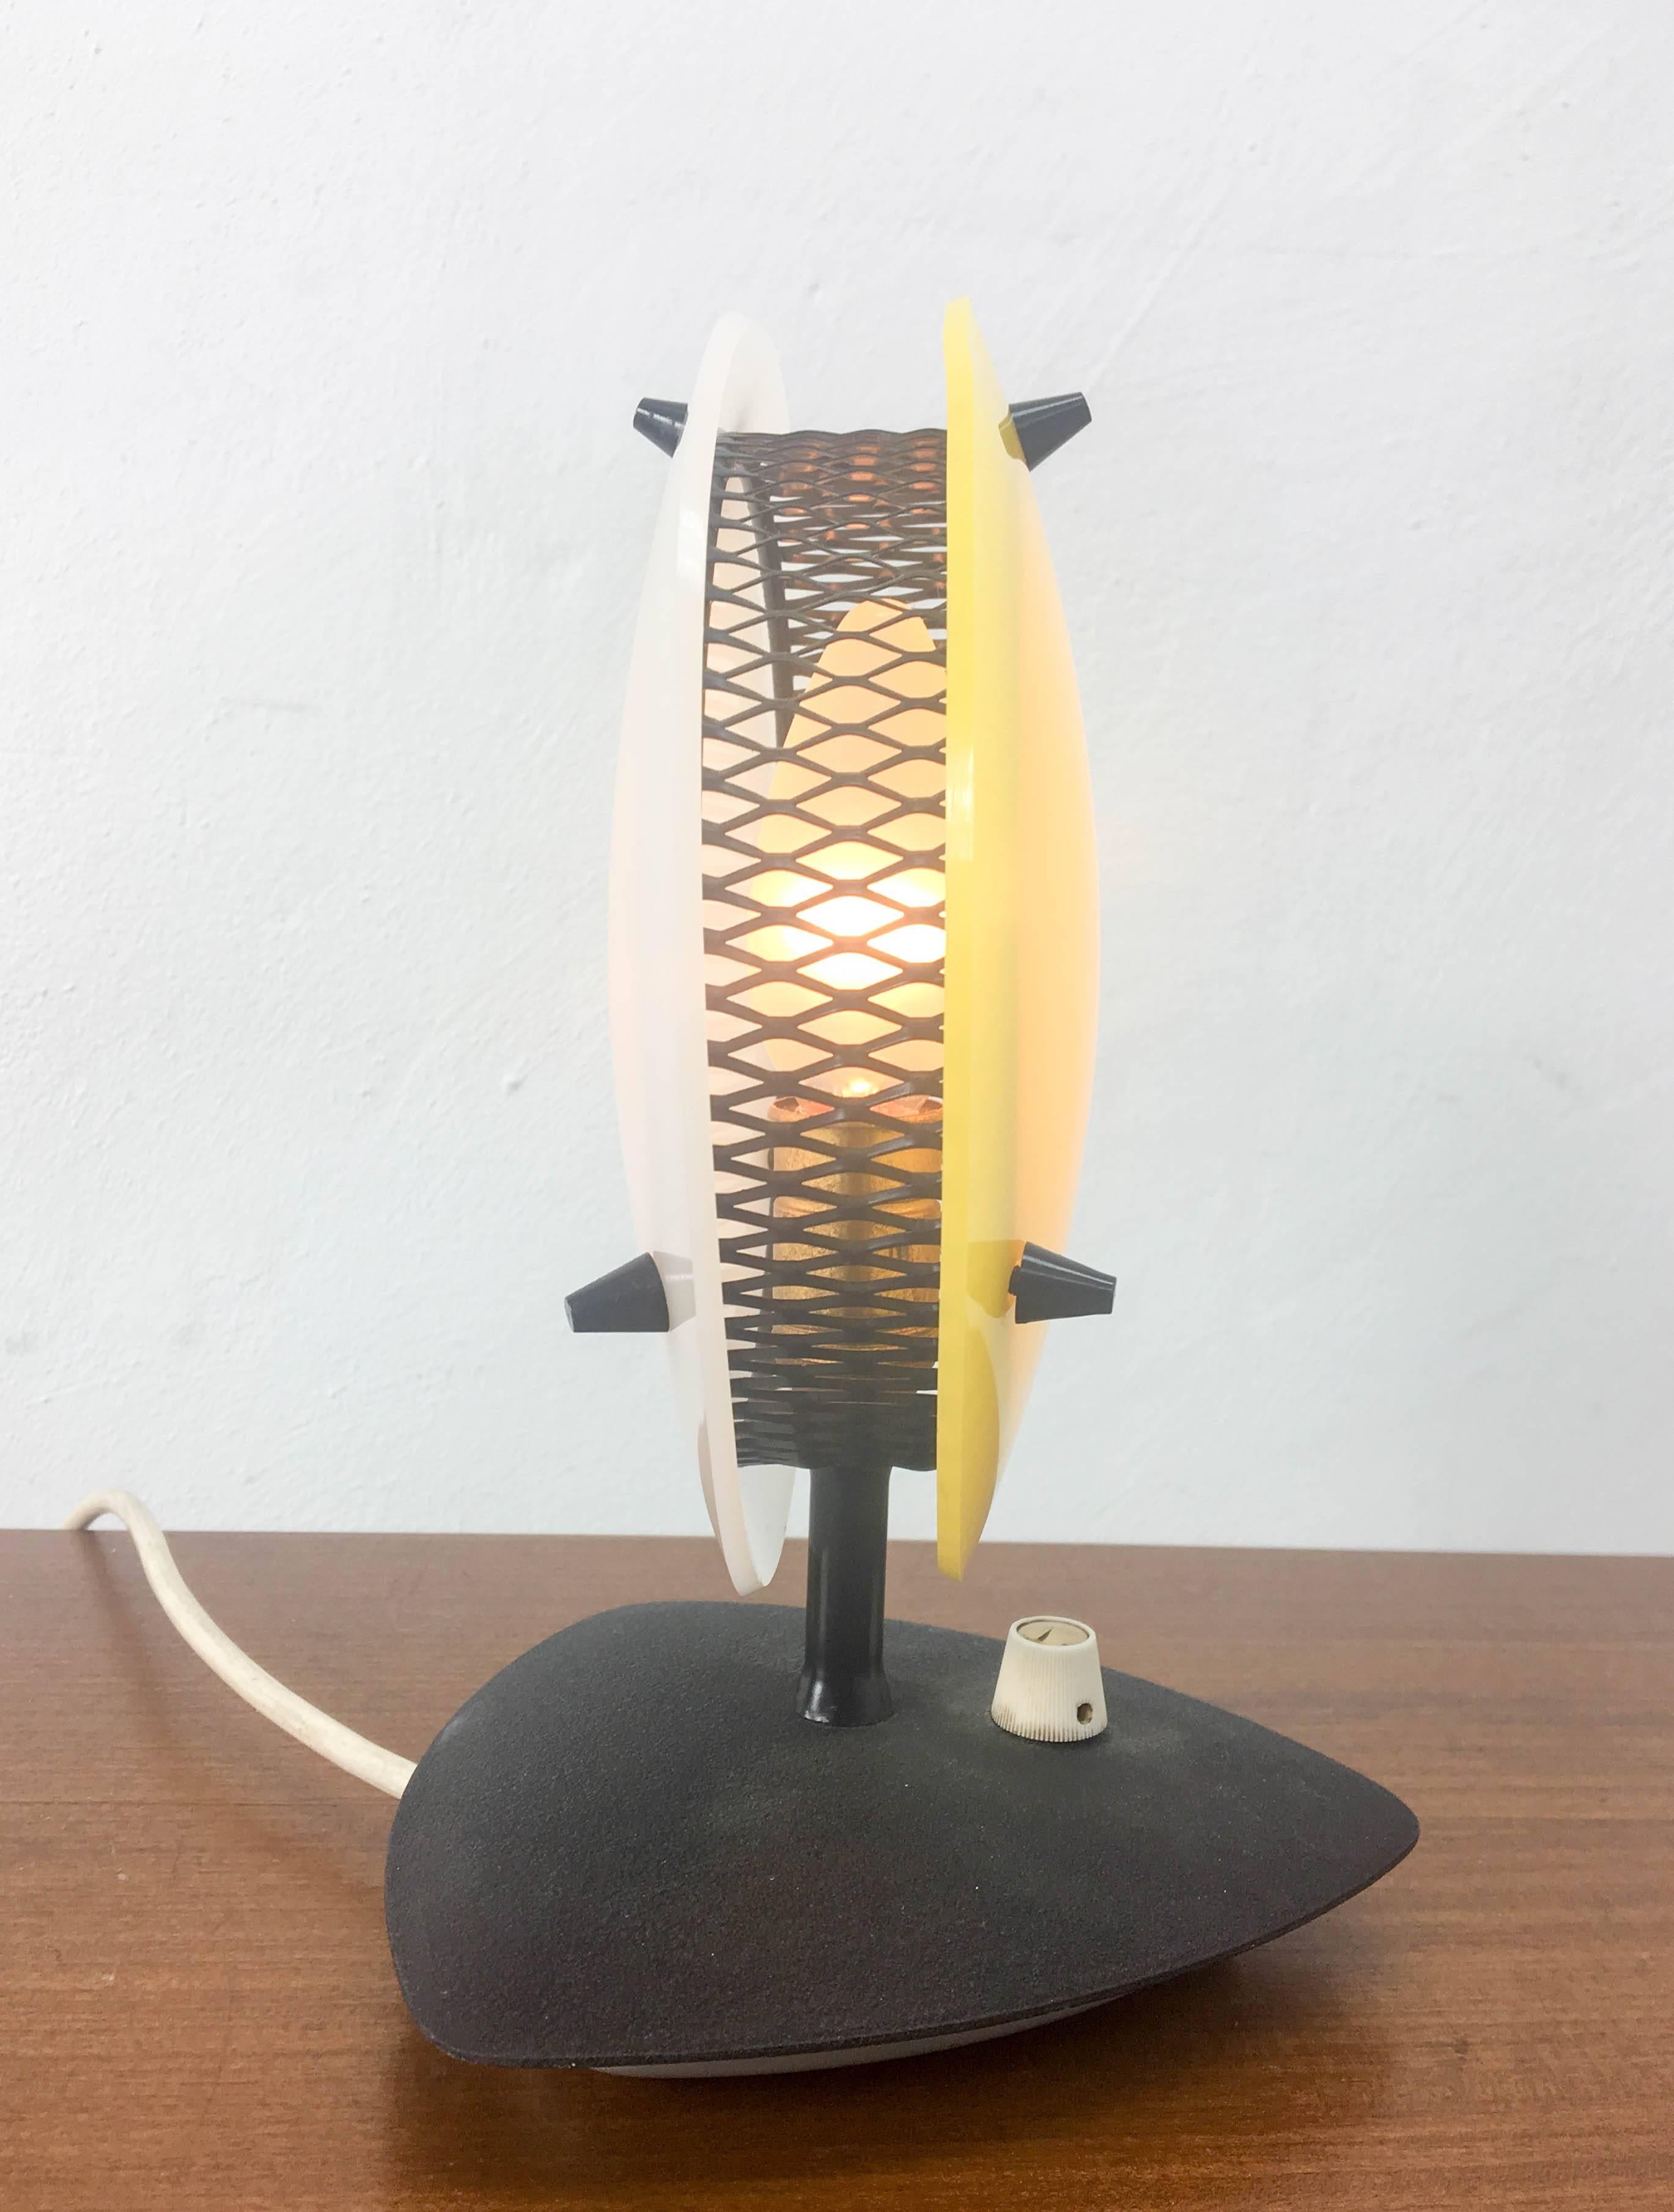 Stylish  1950s Sonnekind  table or desk lamp for Tele Ambiance France 50s.
This lamp features a very early example of a dimmer switch and this particular one is in good working order, as is the rest of the lamp.